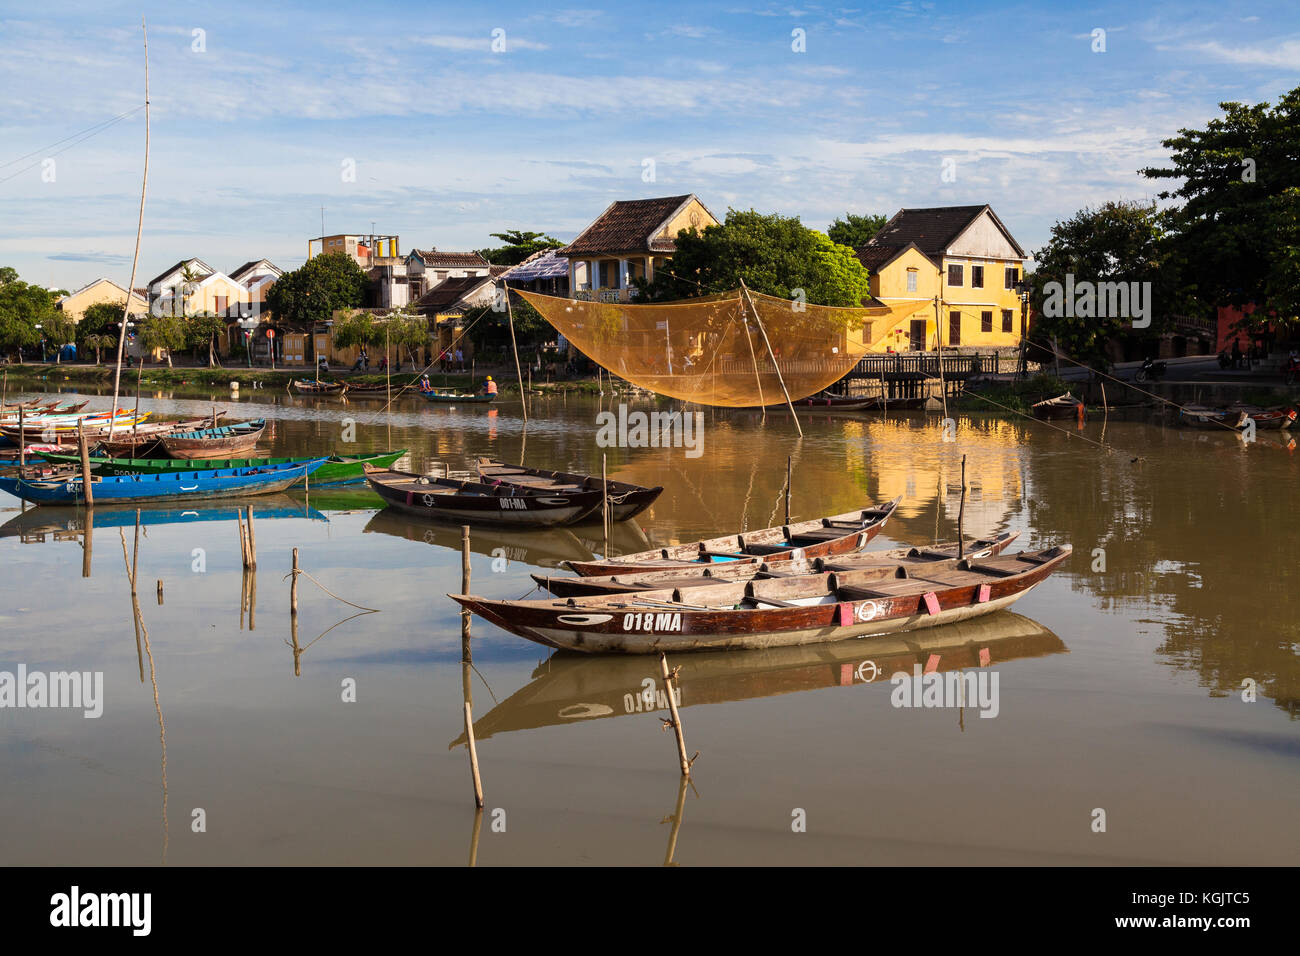 Early morning at Hoi An old town river canal. A hanging fishing net on display. Vietnam. Stock Photo